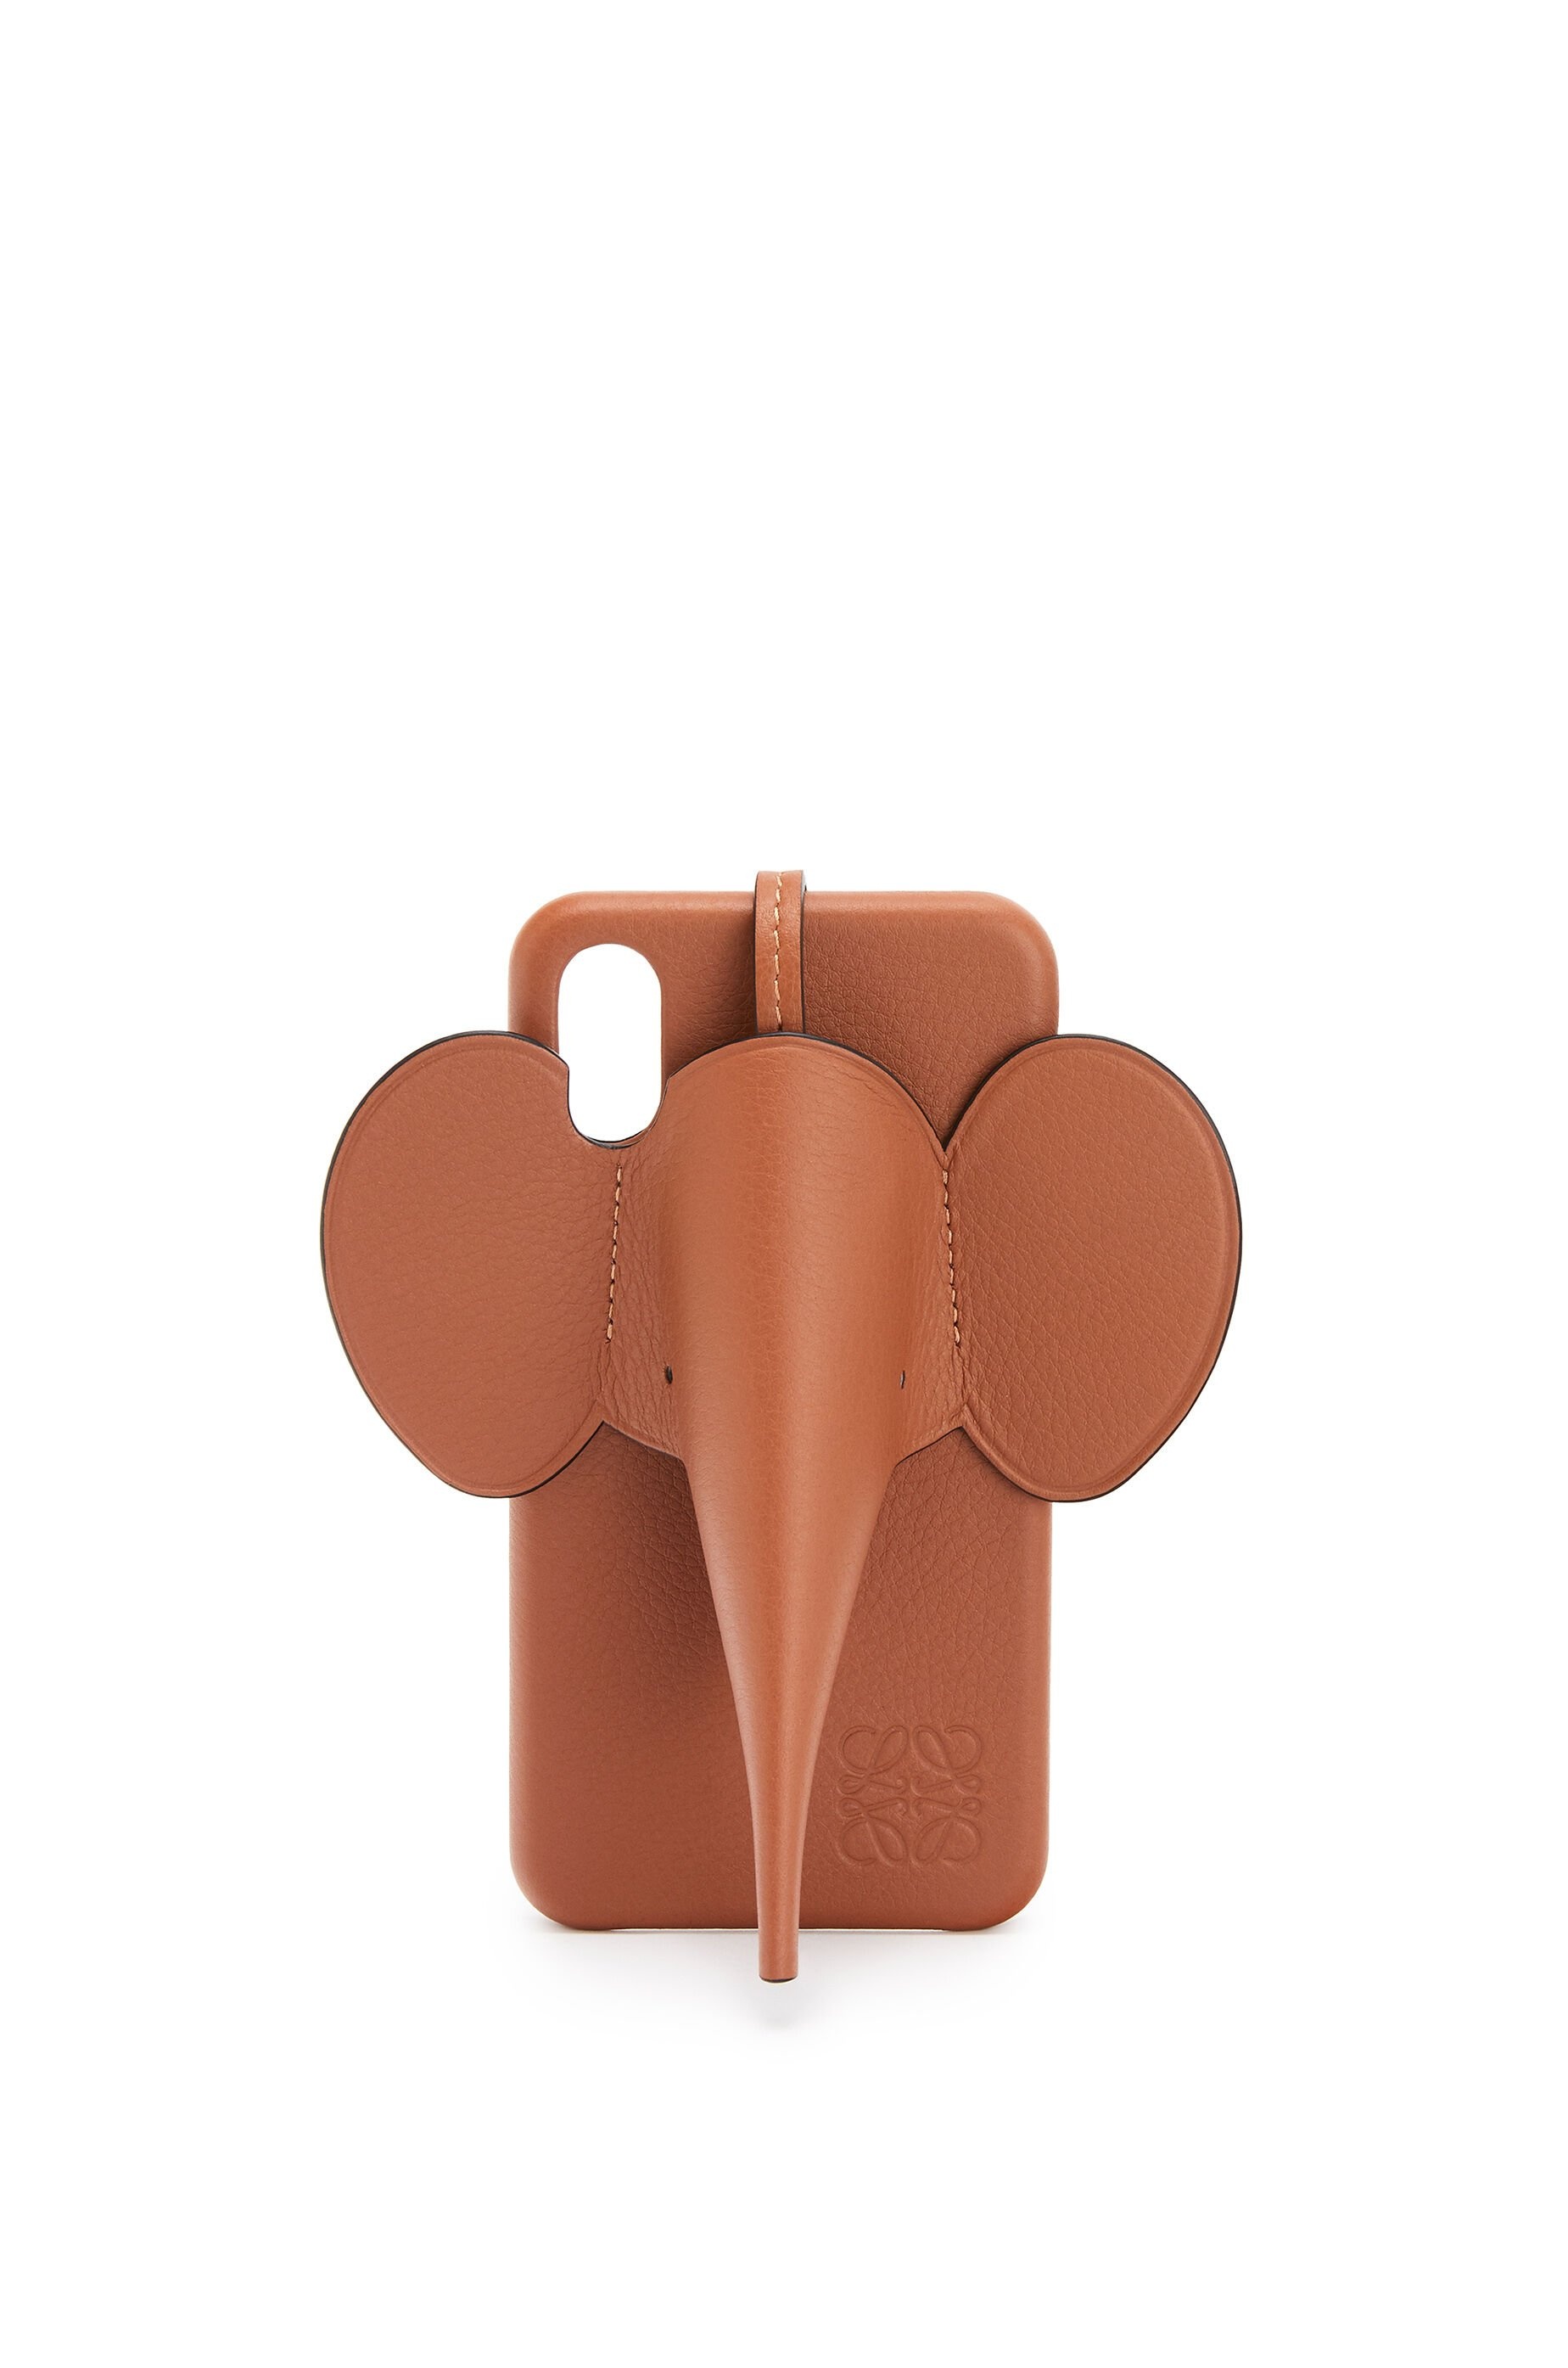 Elephant cover for iPhone X/XS in classic calfskin - 1